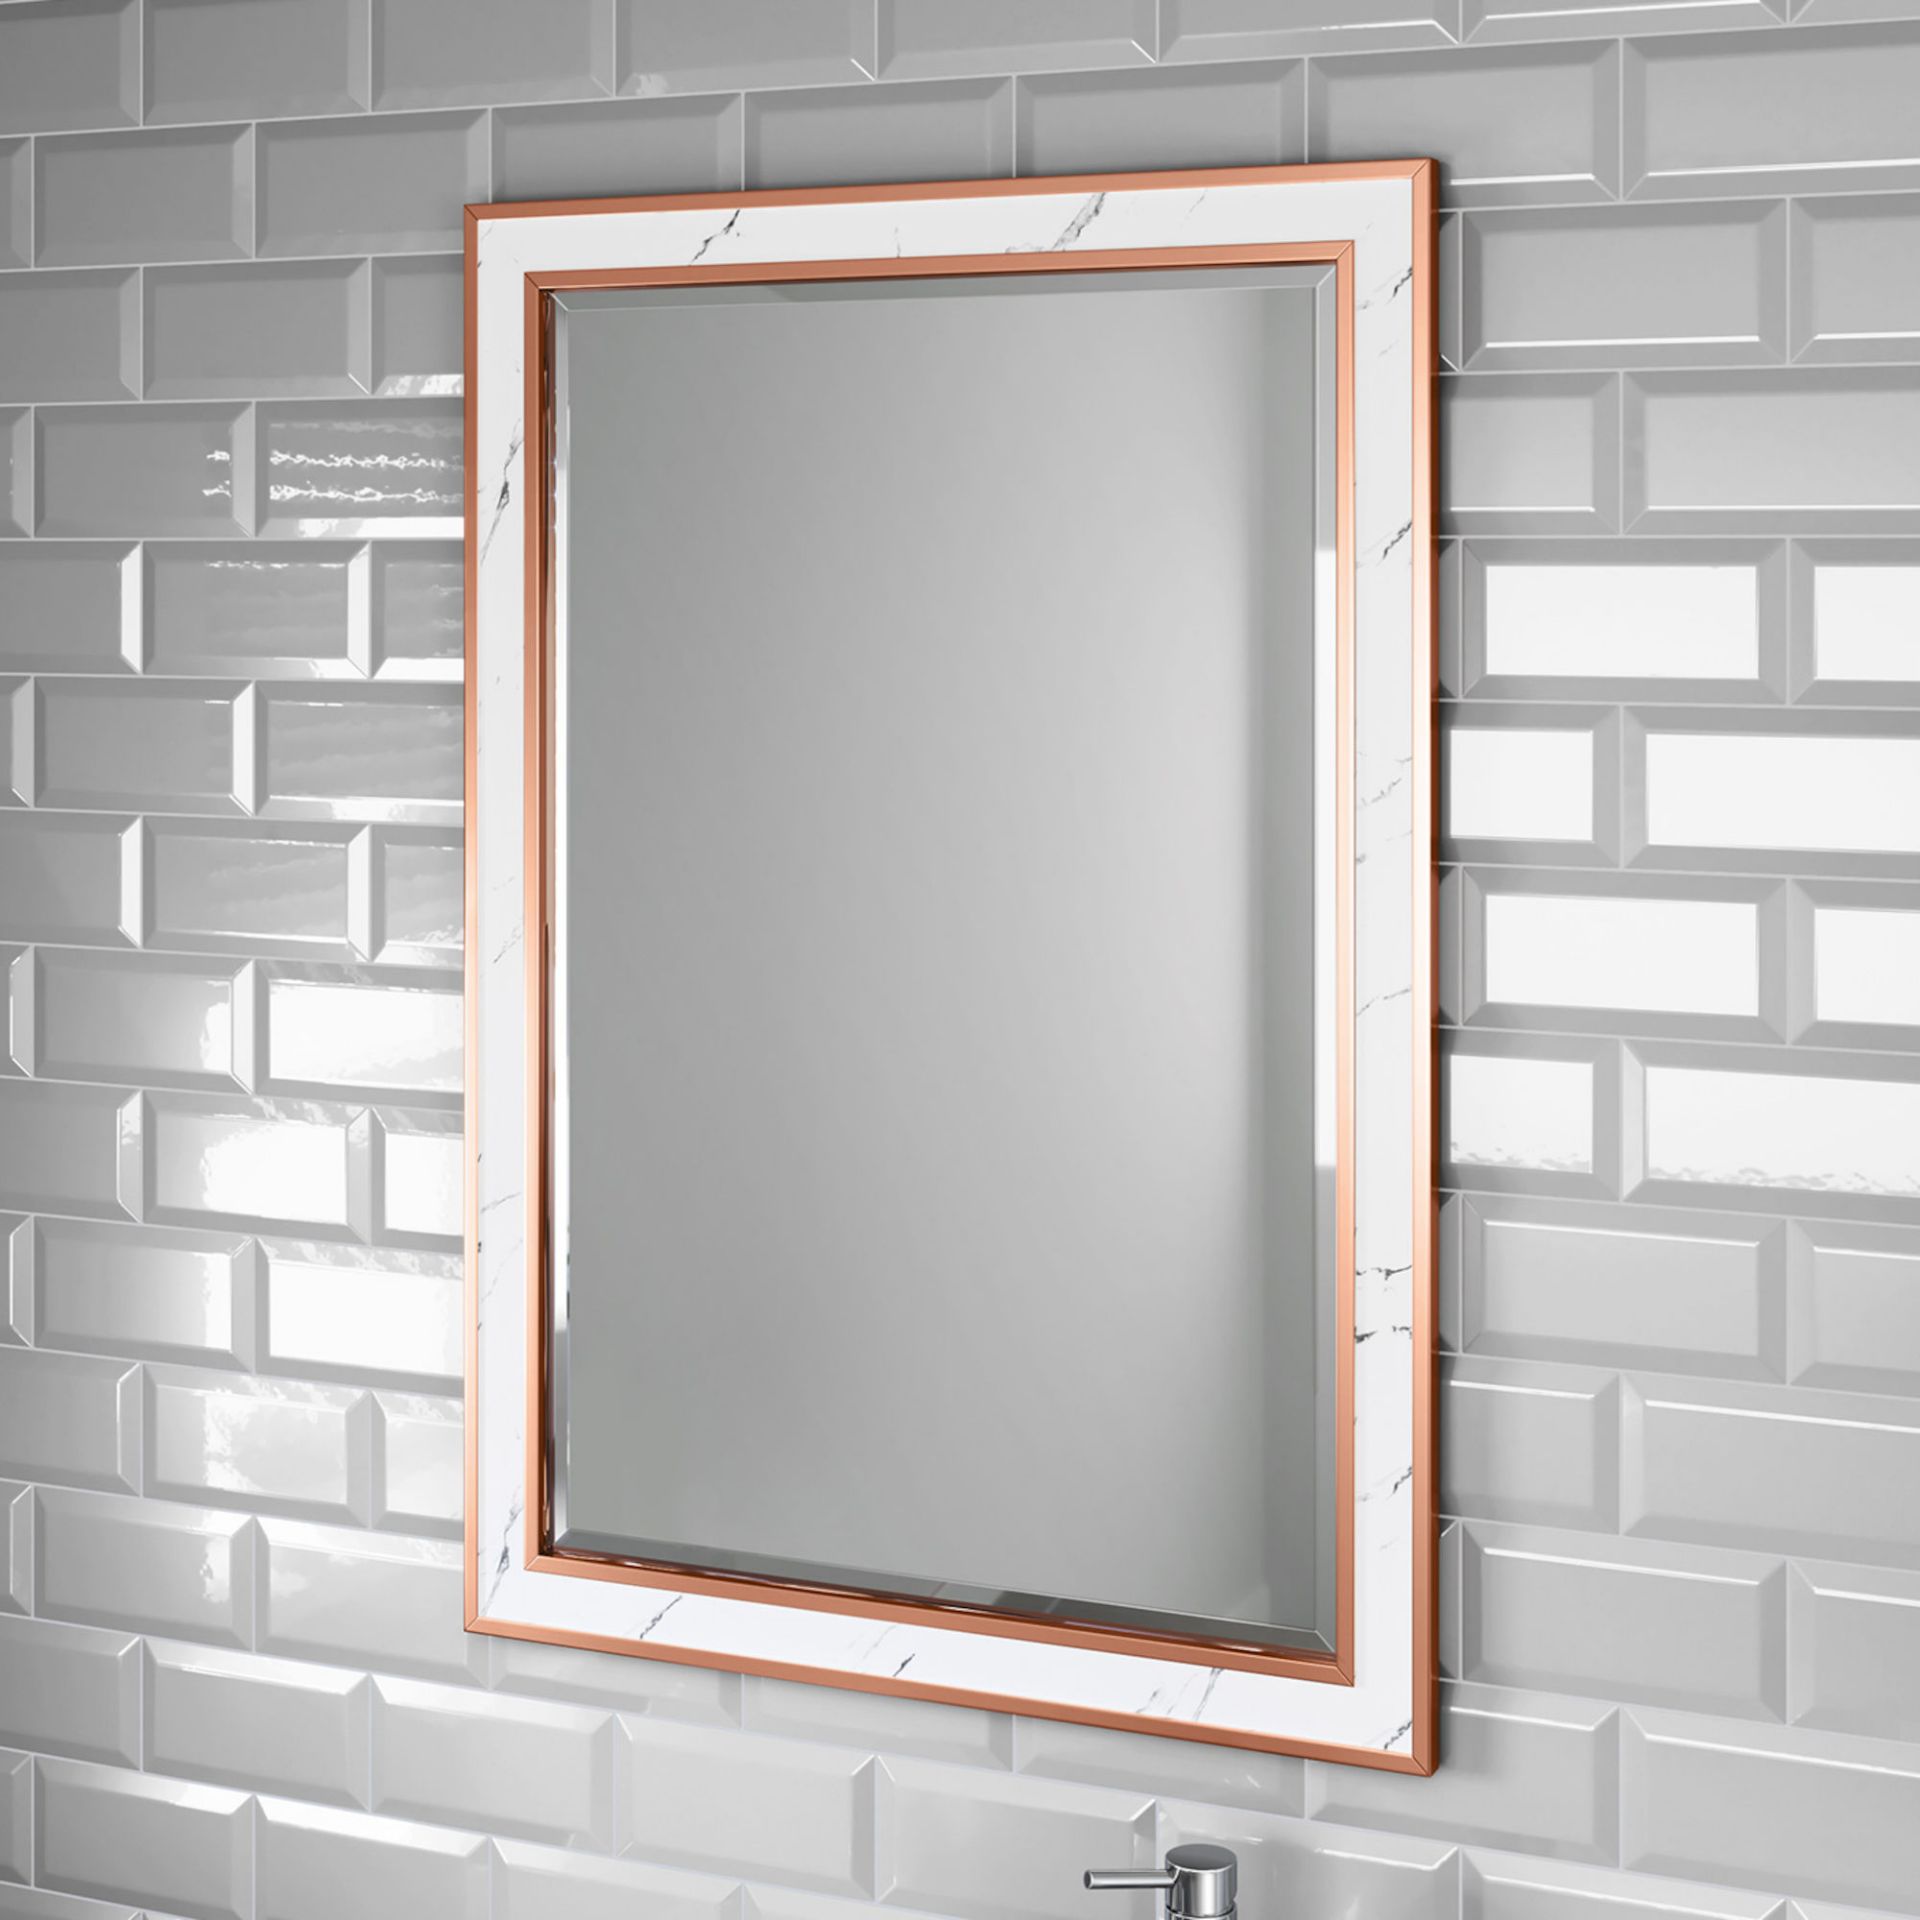 (PT107) 700x1000mm Marble Copper Framed Mirror. RRP £69.99. Manufactured from eco friendly